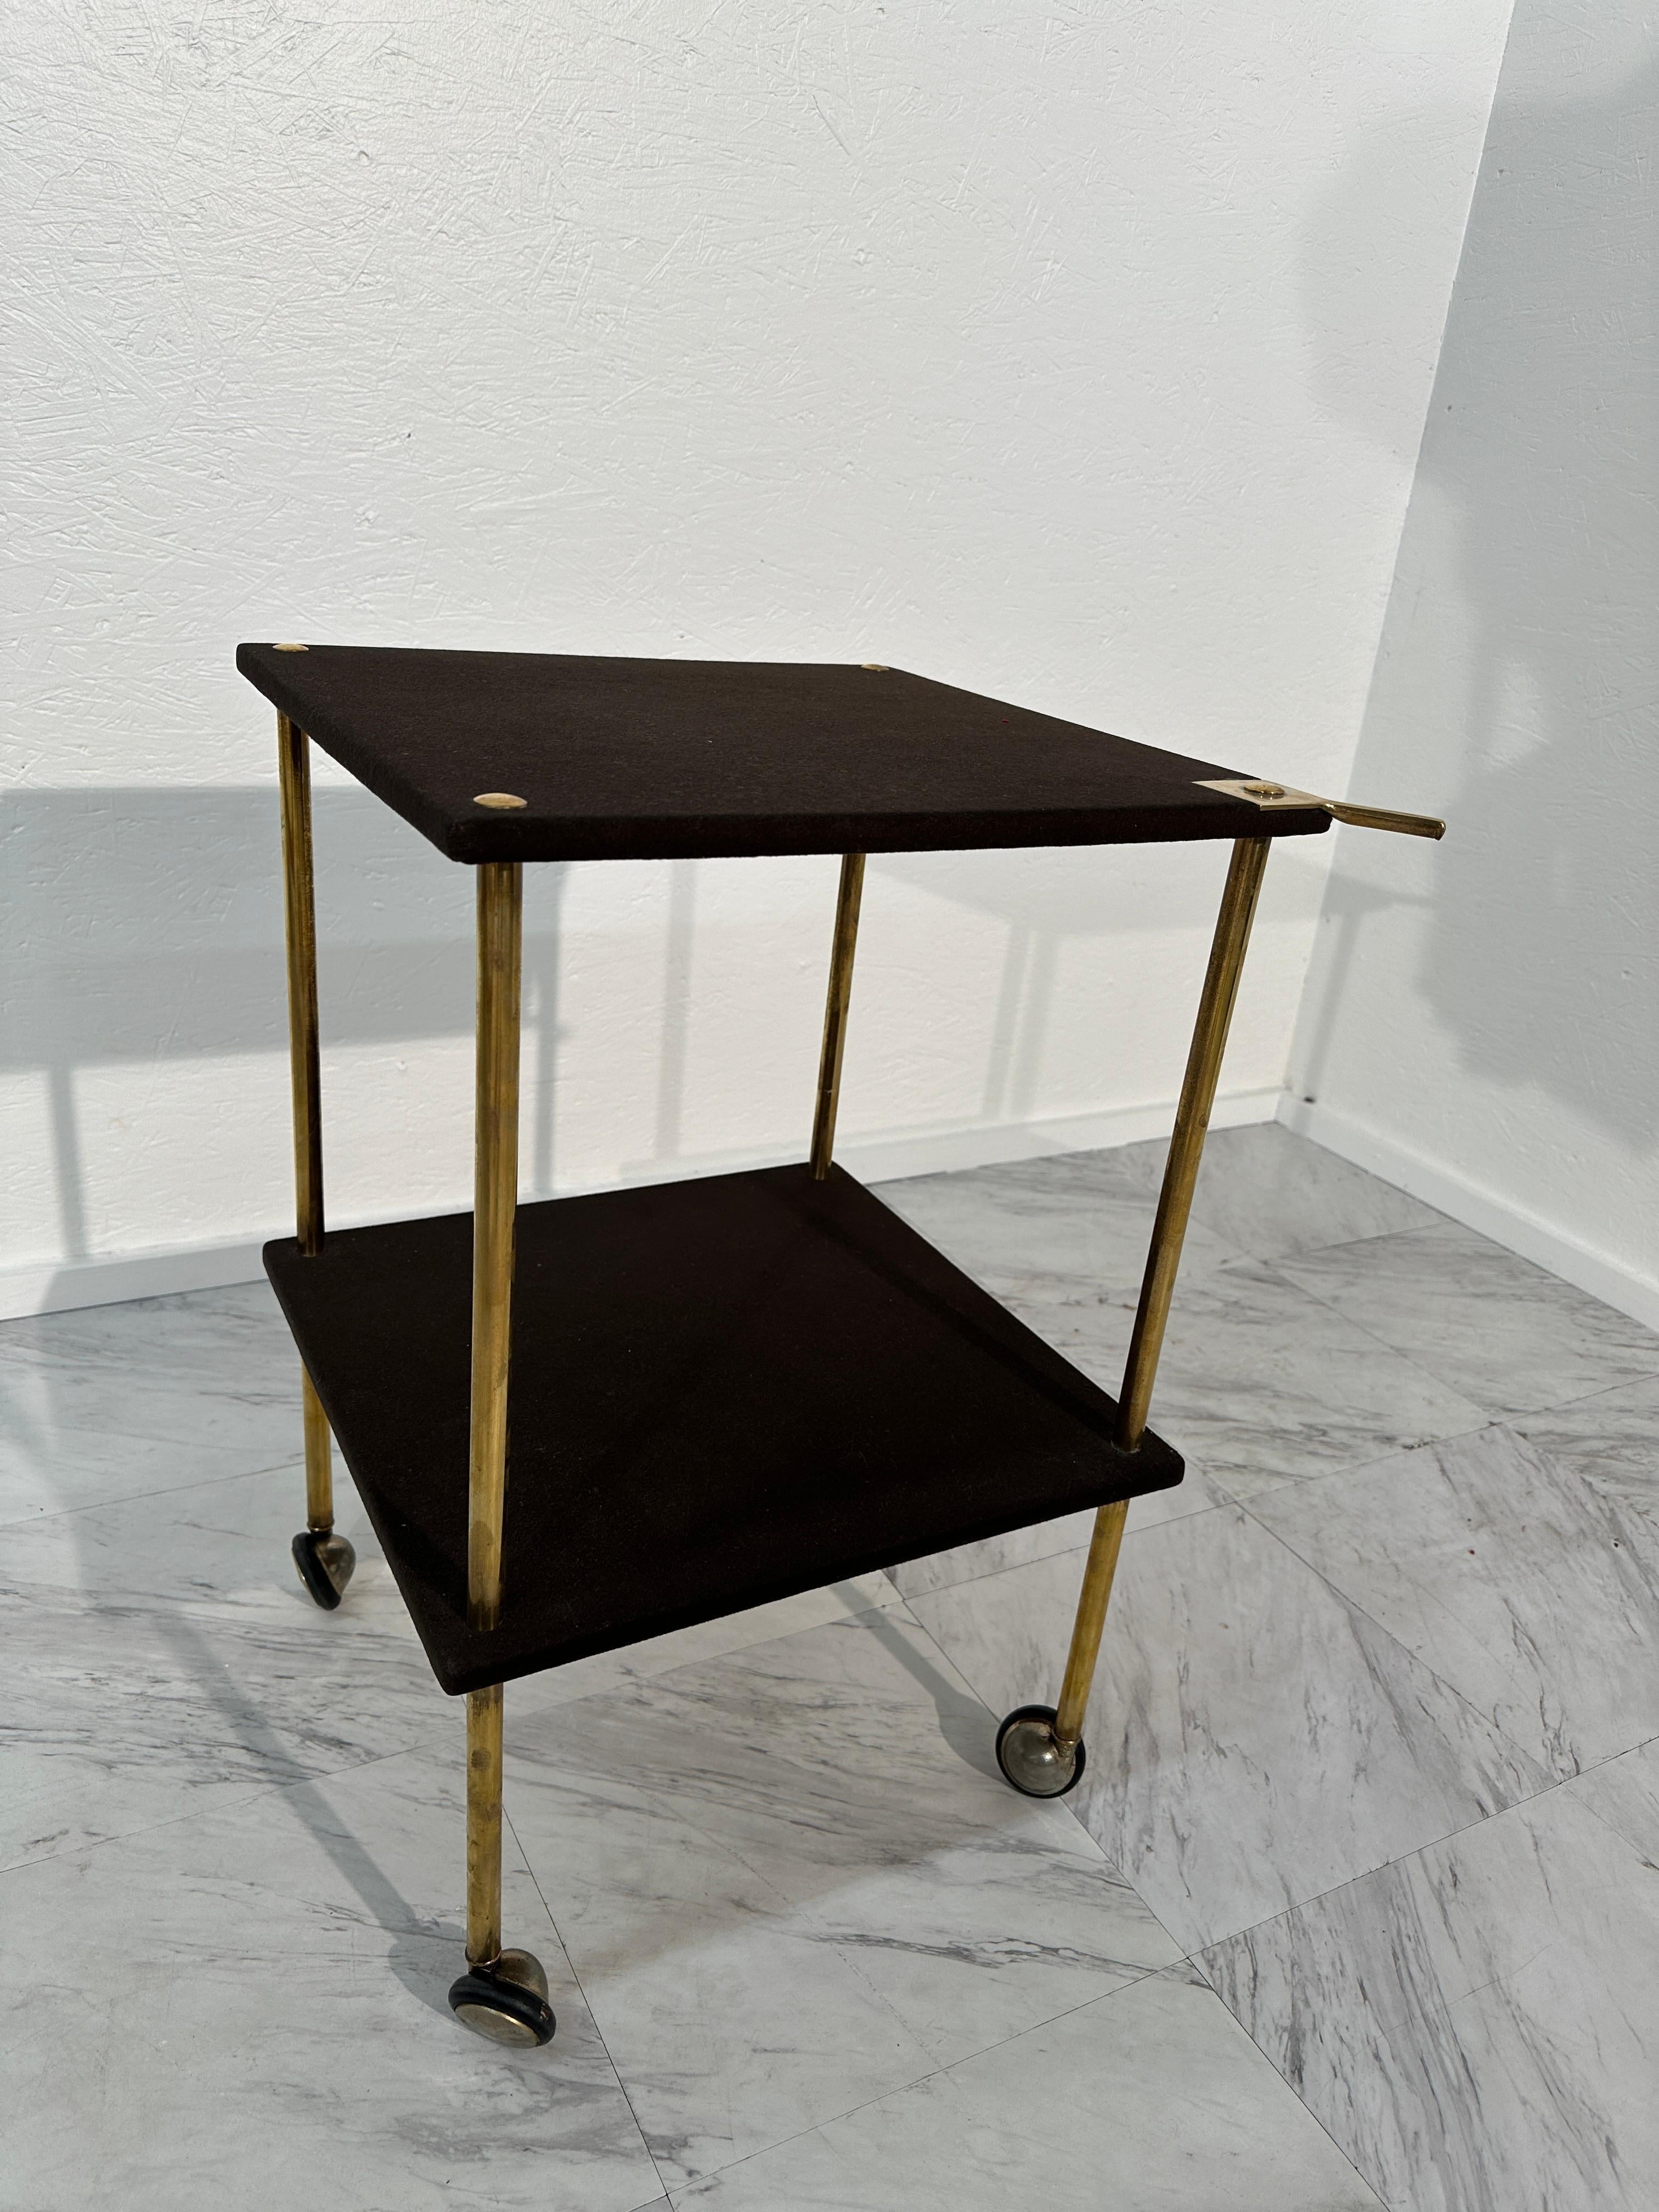 Embark on a journey through mid-century Italian design with the Vintage Trolley on Wheels T9 by Luigi Caccia Dominioni for Azucena, circa the 1960s. This iconic piece encapsulates Caccia Dominioni's commitment to both elegance and functionality. The